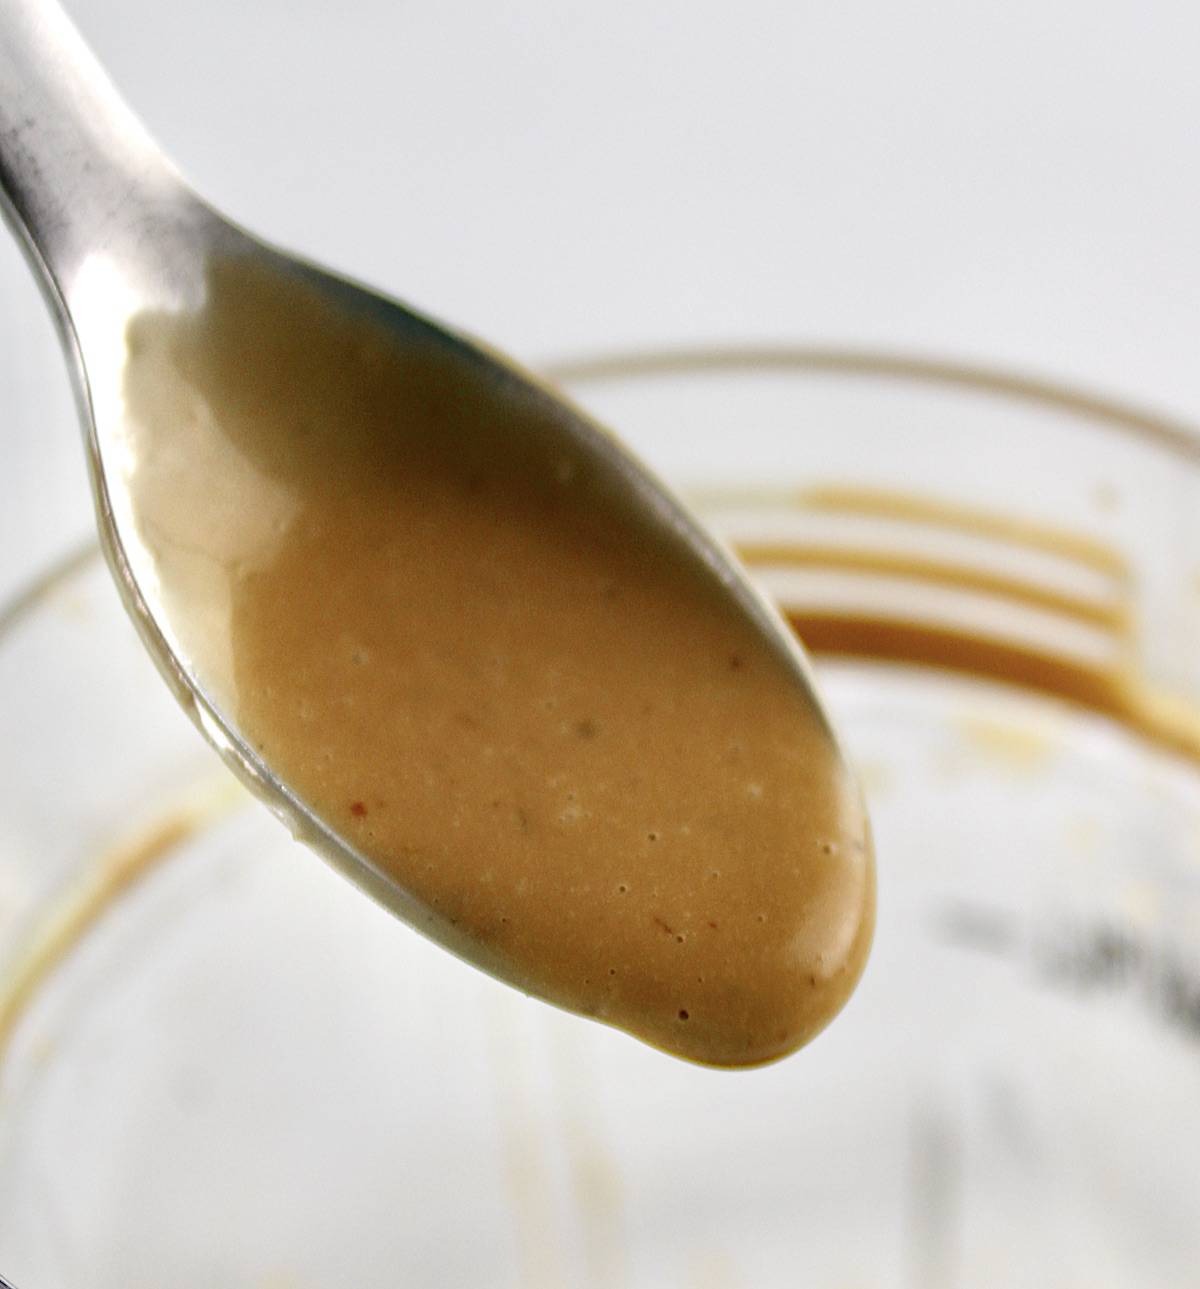 Creamy Balsamic Dressing dripping from spoon